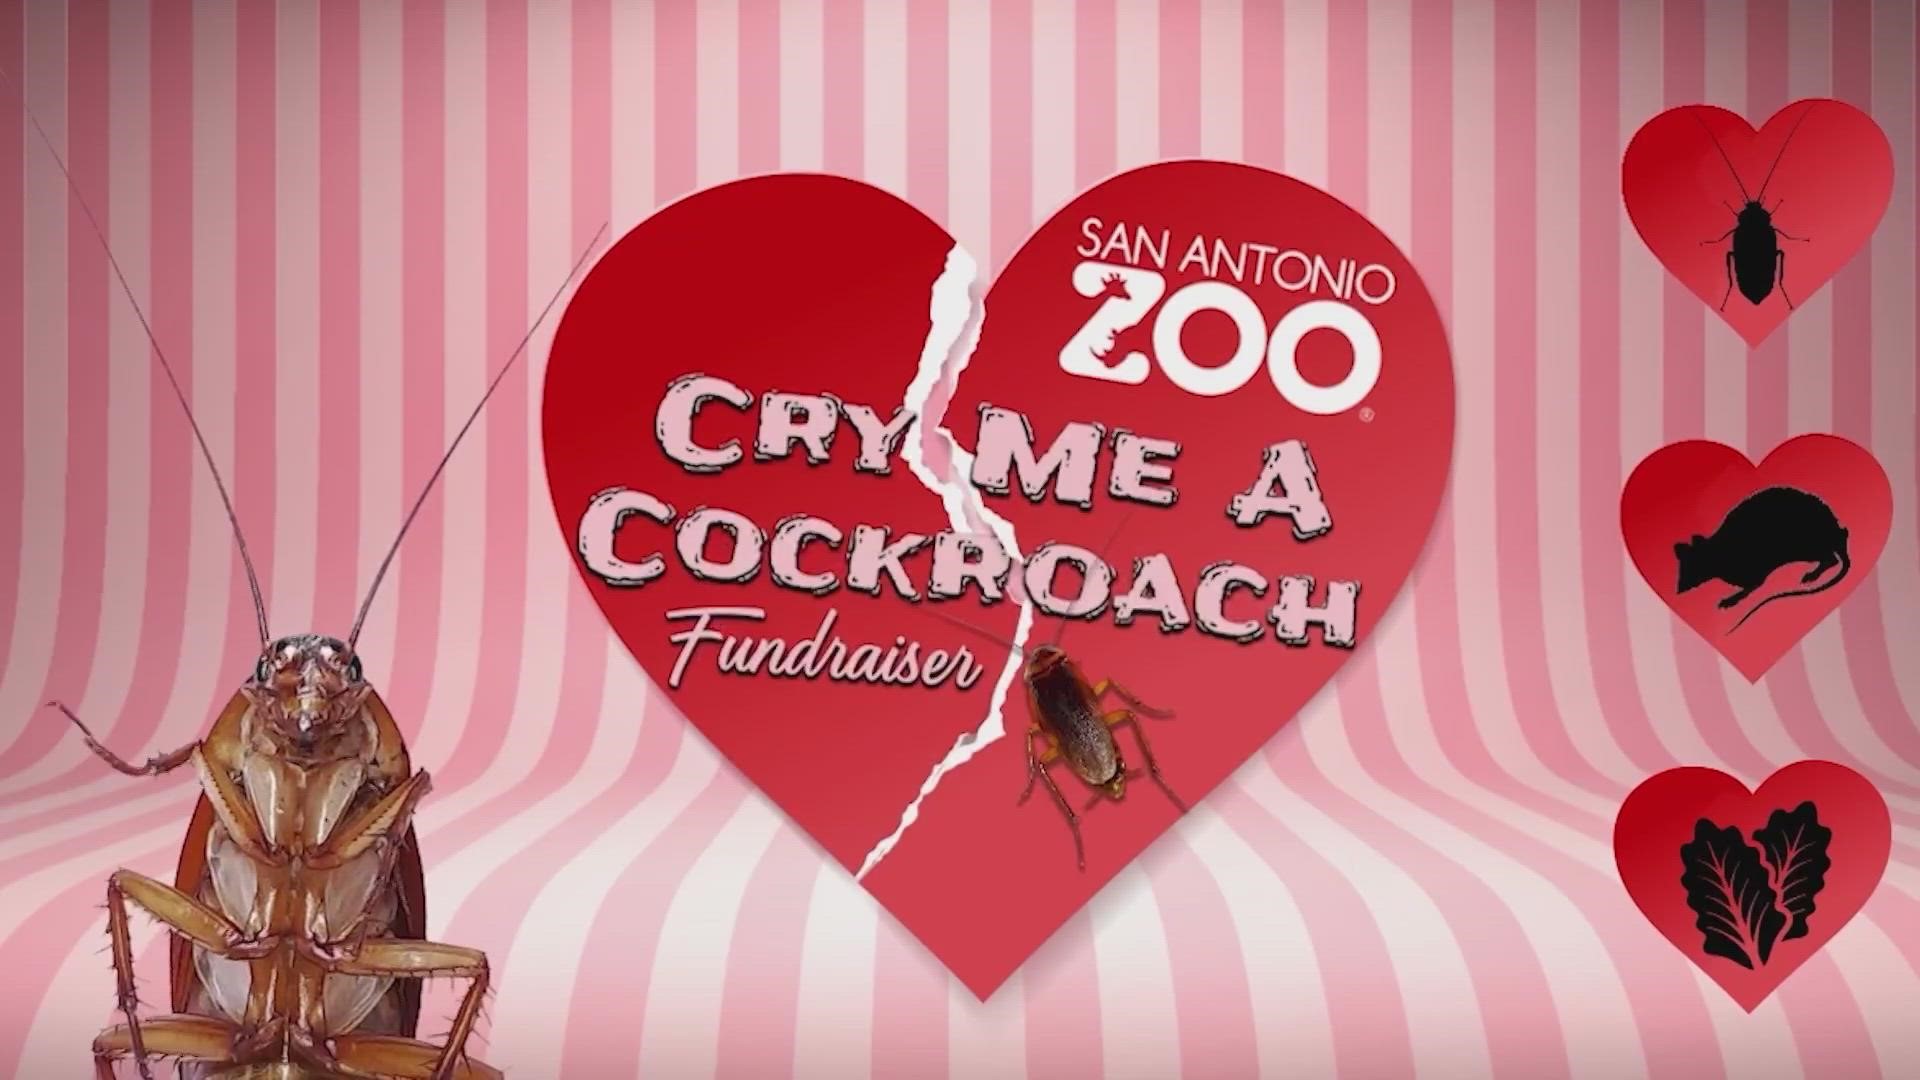 For a small donation the zoo will name a roach after your ex and send you a video of an animal eating it.